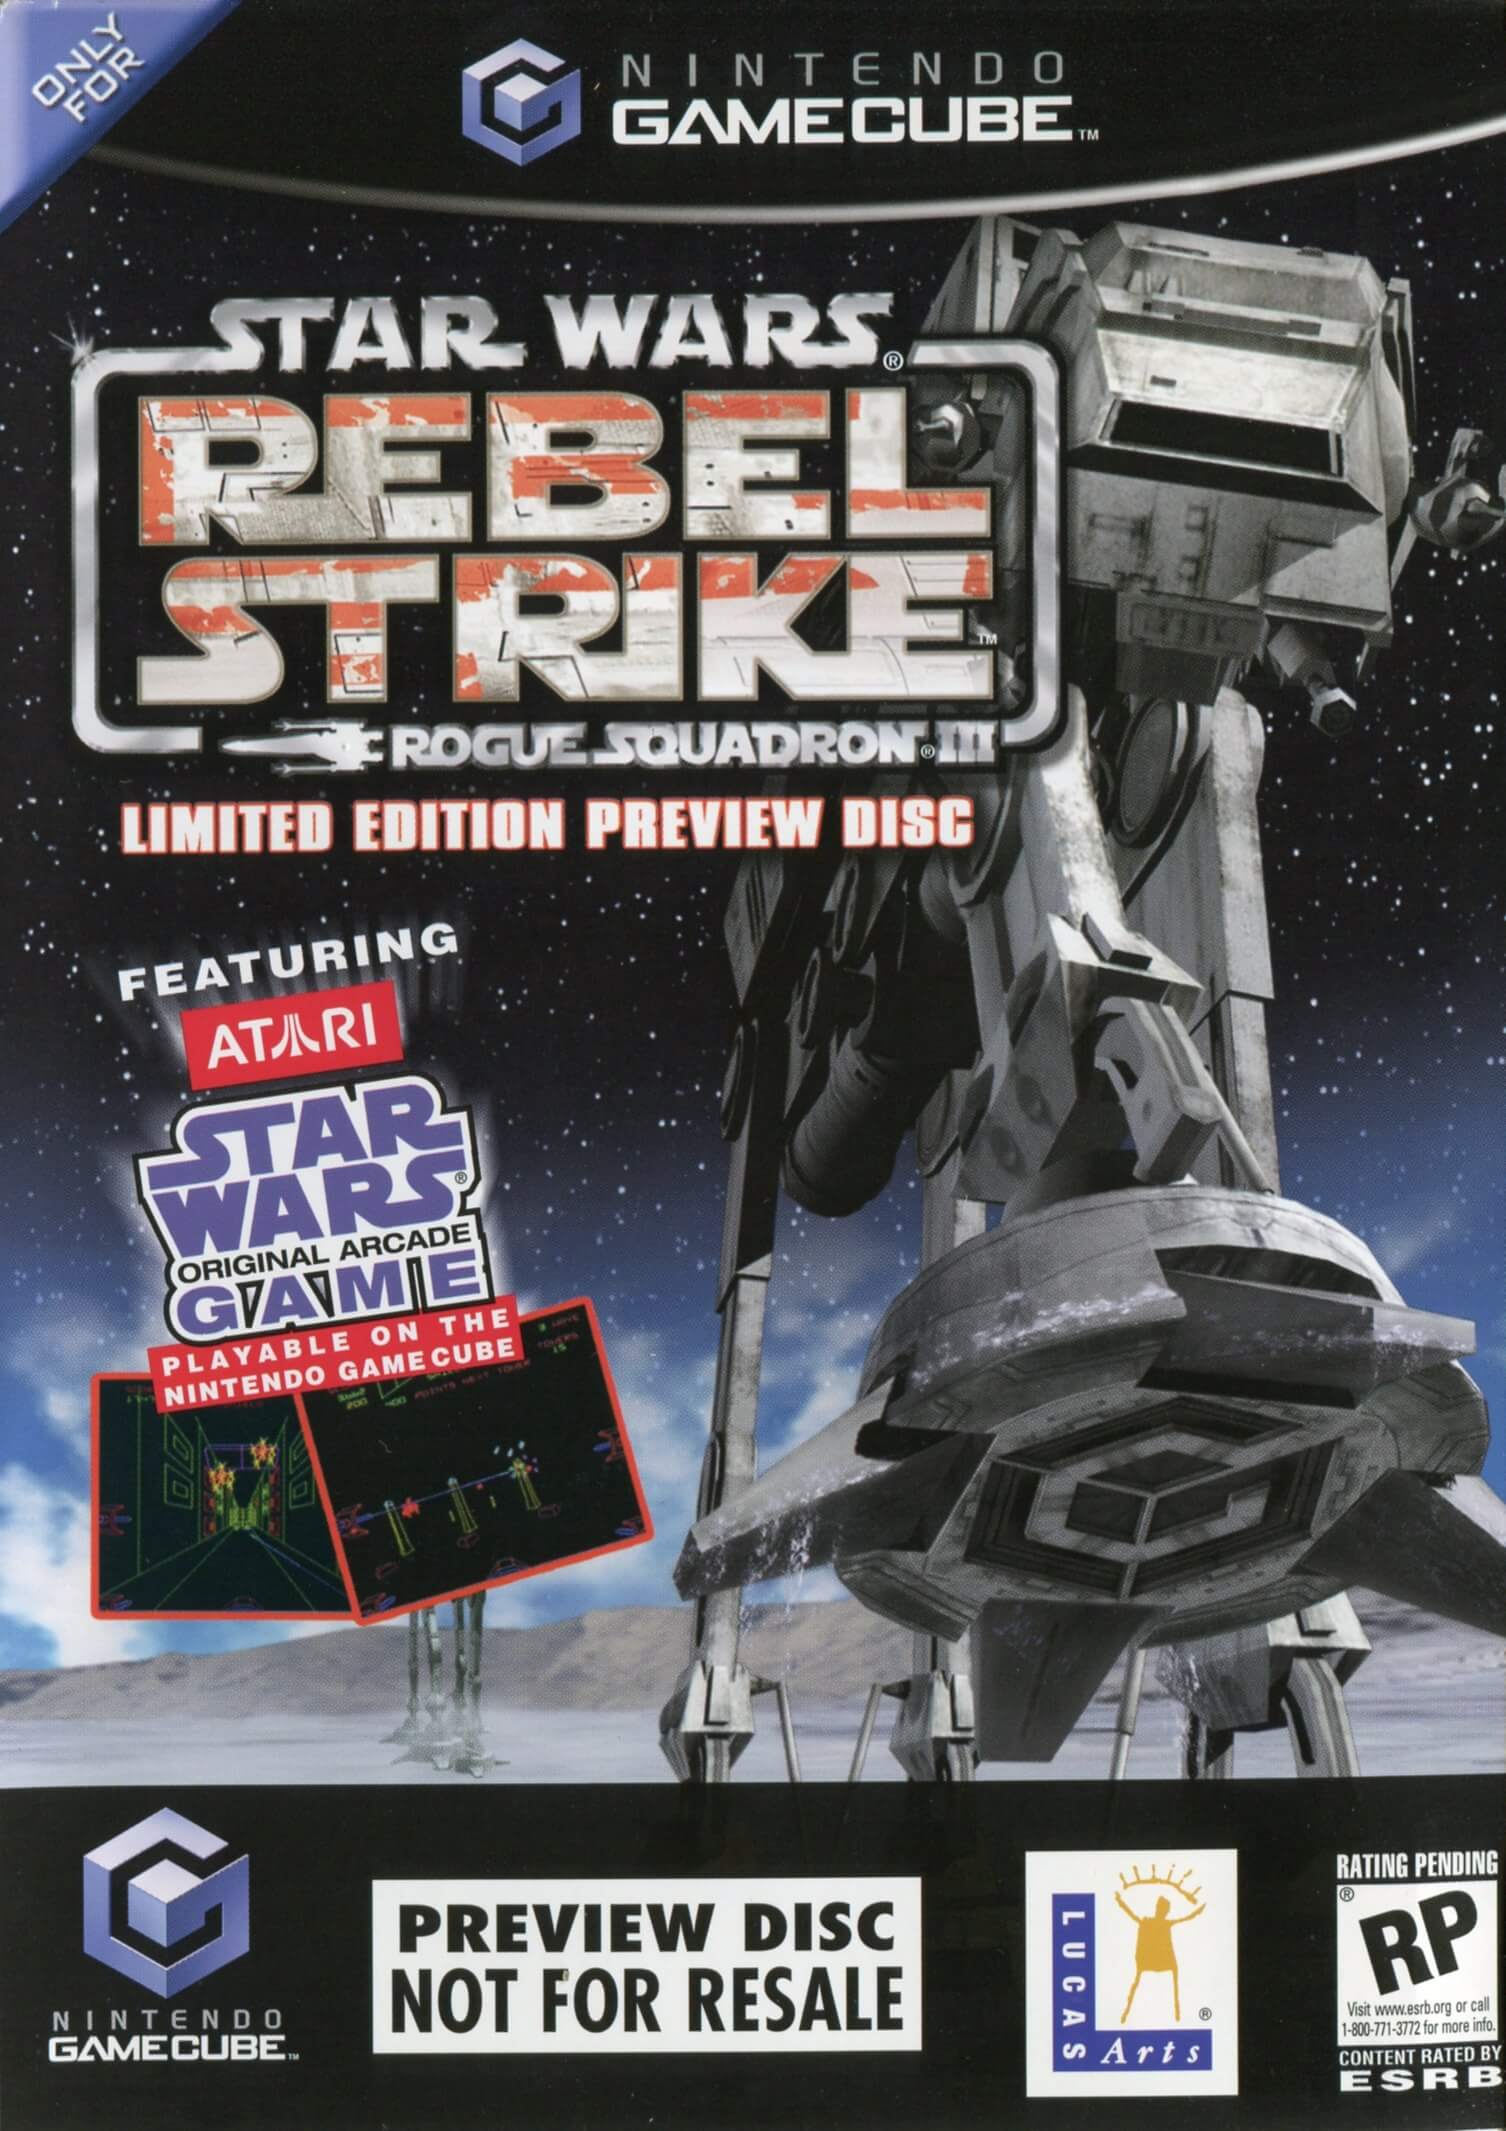 Star Wars Rogue Squadron III: Rebel Strike Limited Edition Preview Disc